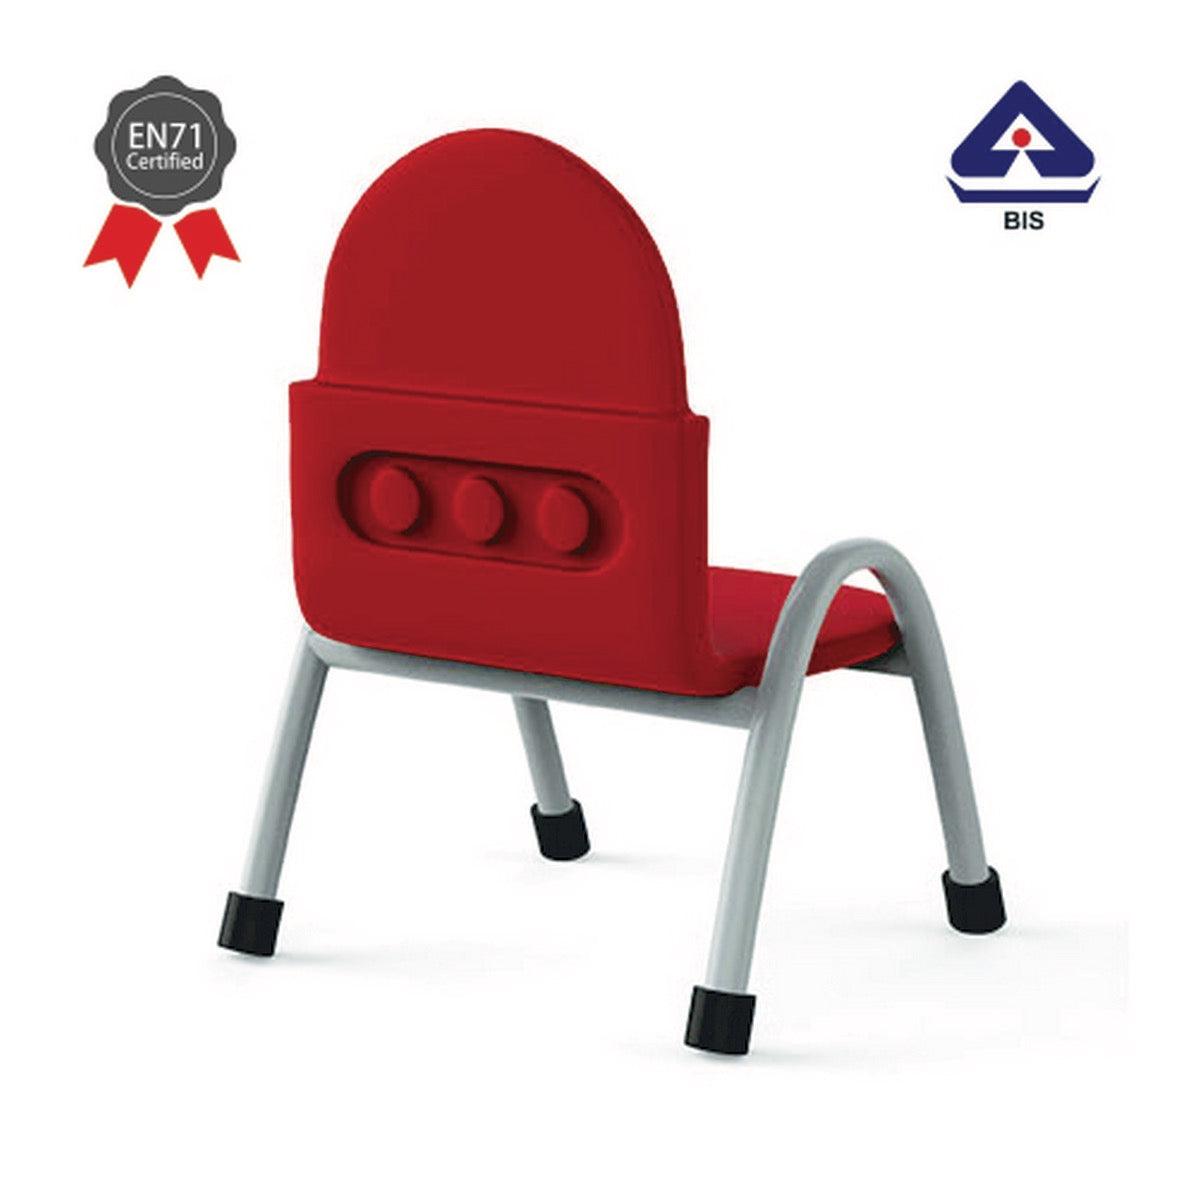 Ok Play Robo Chair, Study Chair, Sturdy And Durable Chair, Plastic Chair, Perfect For Home, Creches And School, Red, 5 to 10 Years, Height 14 Inches